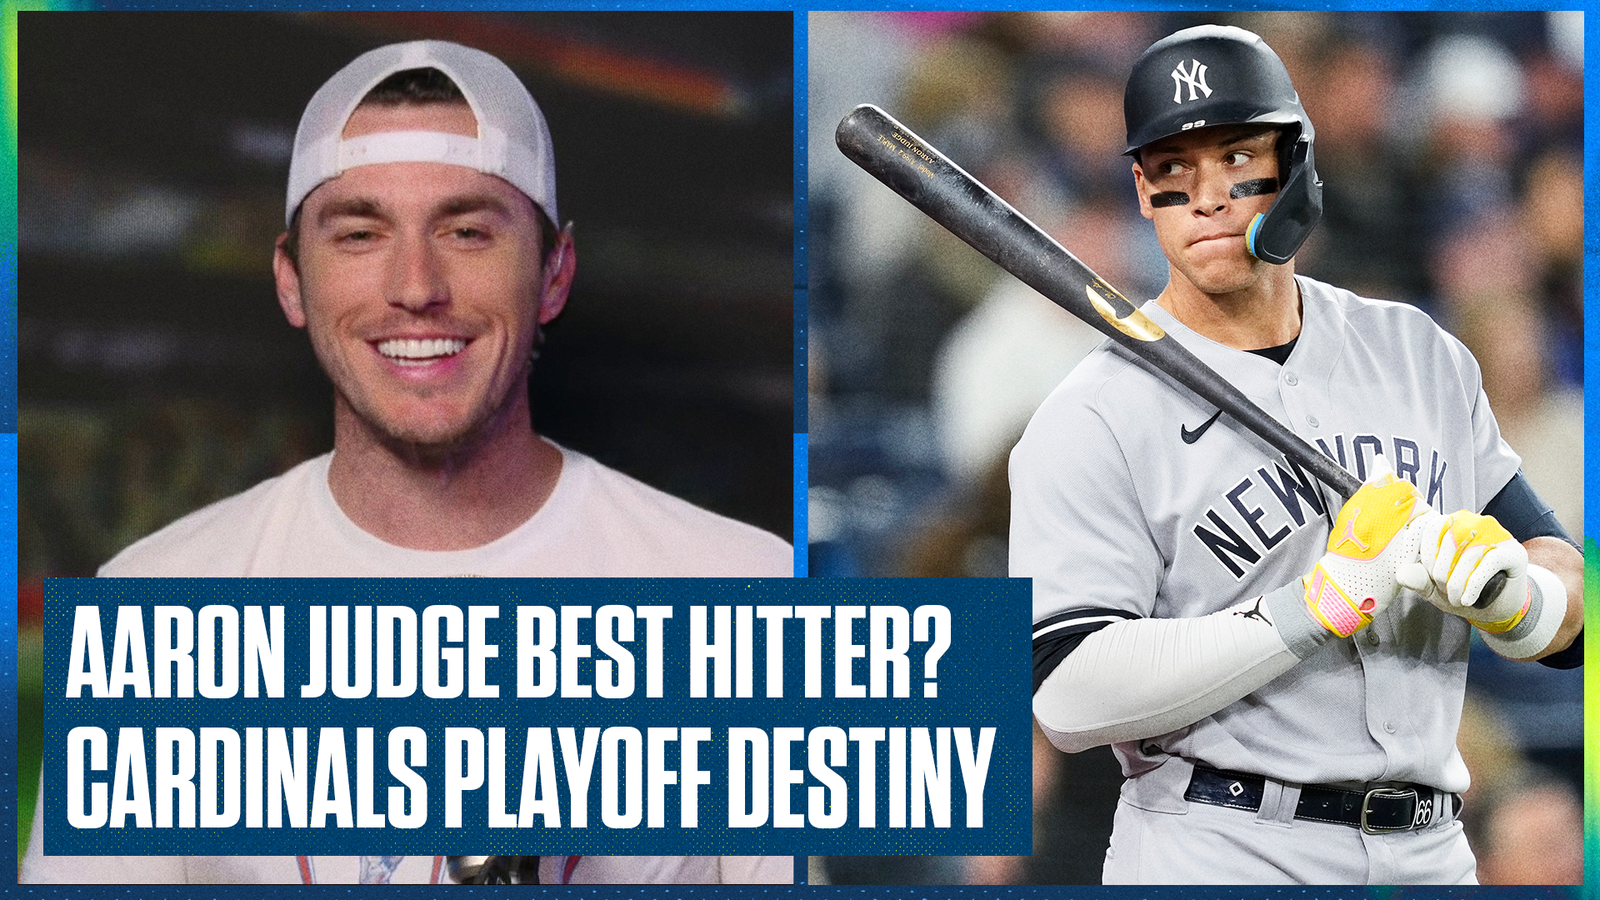 Is Judge MLB's best hitter? Cardinals' playoff hopes, Padres' disappointing